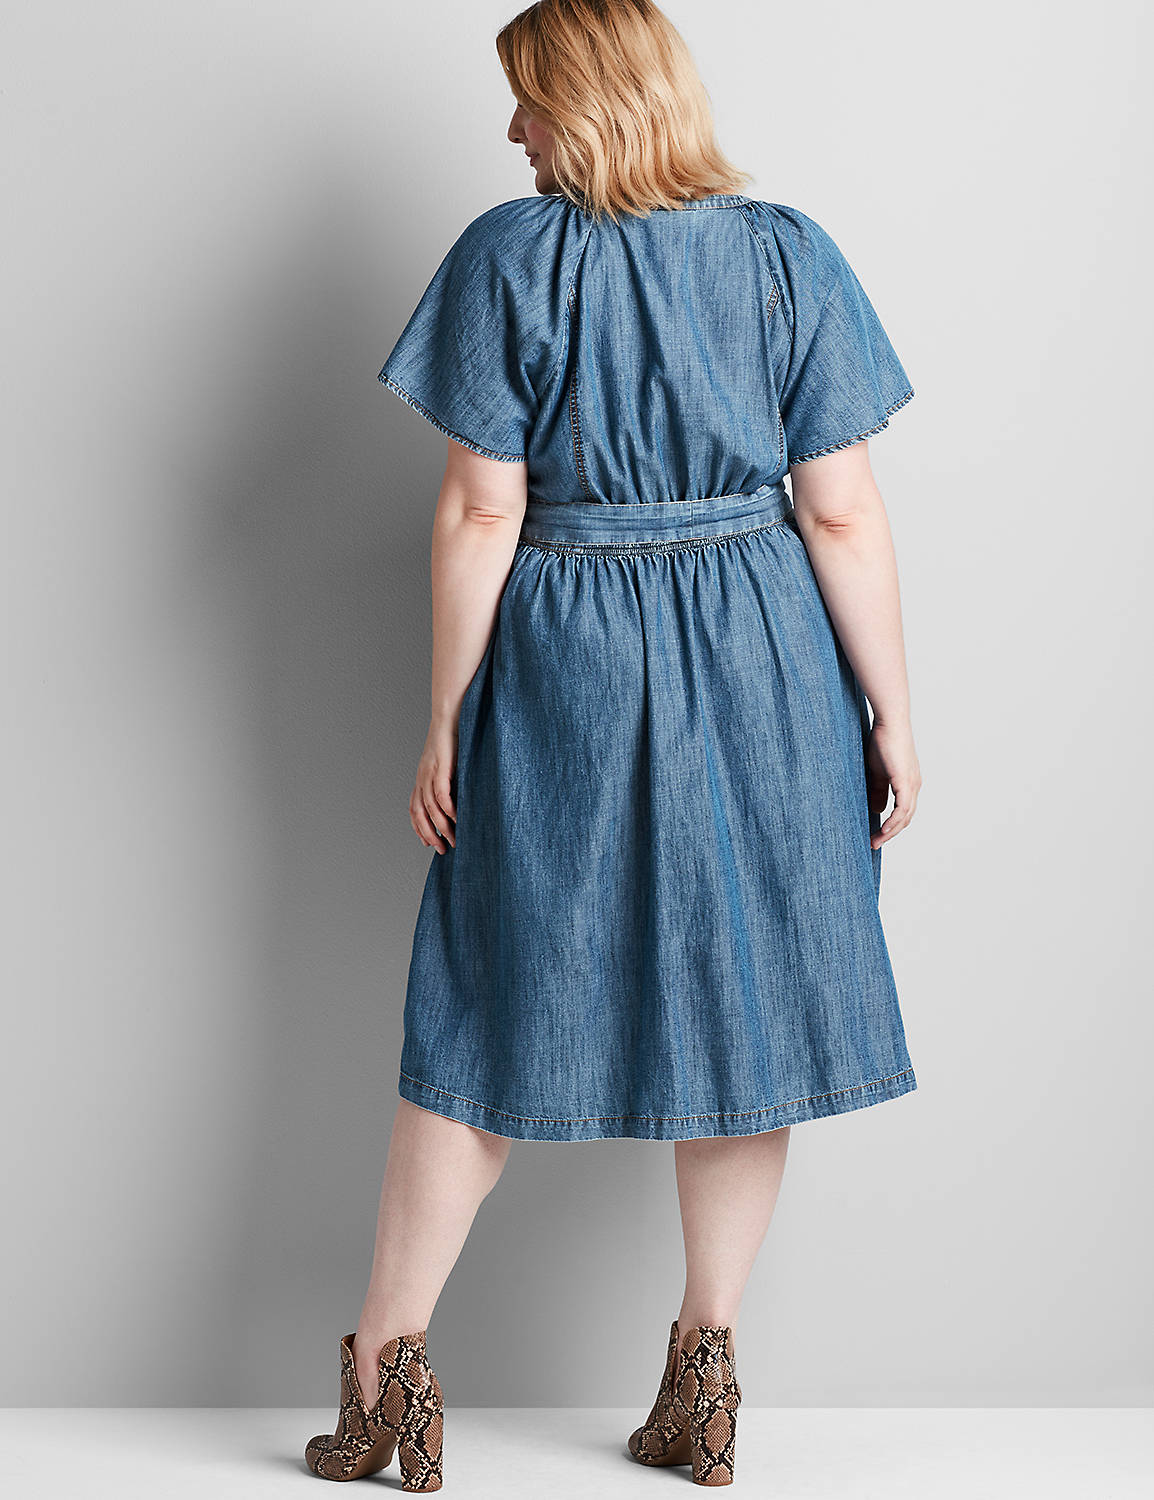 1114372 Short Sleeve Button Front  Fit and Flare Chambray Dress:Chambray:10/12 Product Image 2